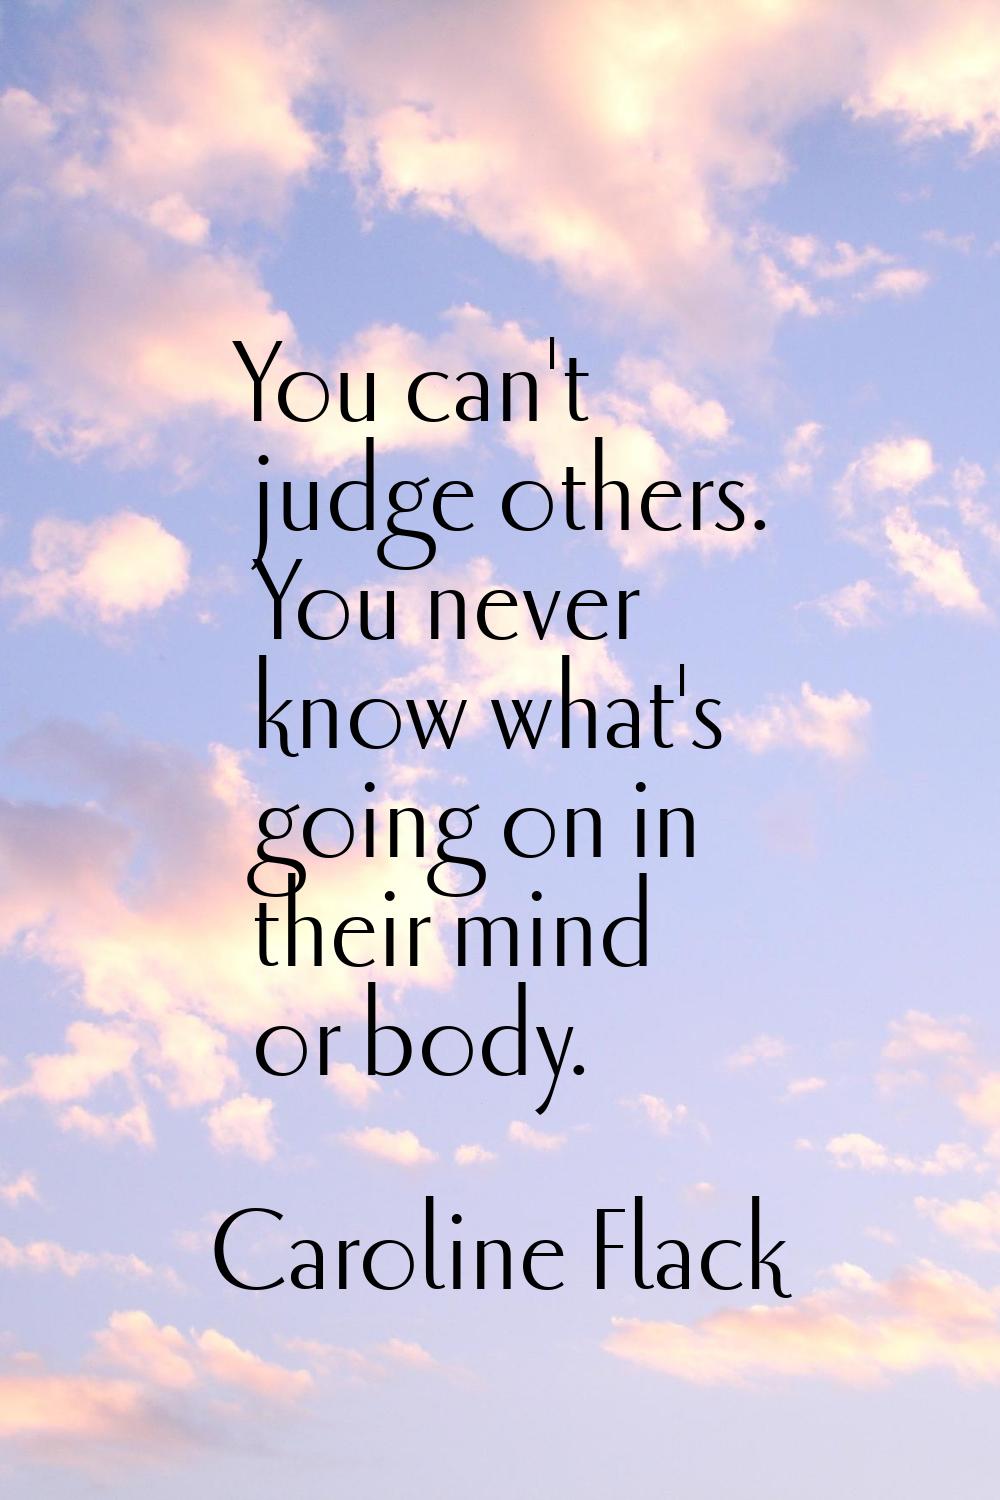 You can't judge others. You never know what's going on in their mind or body.